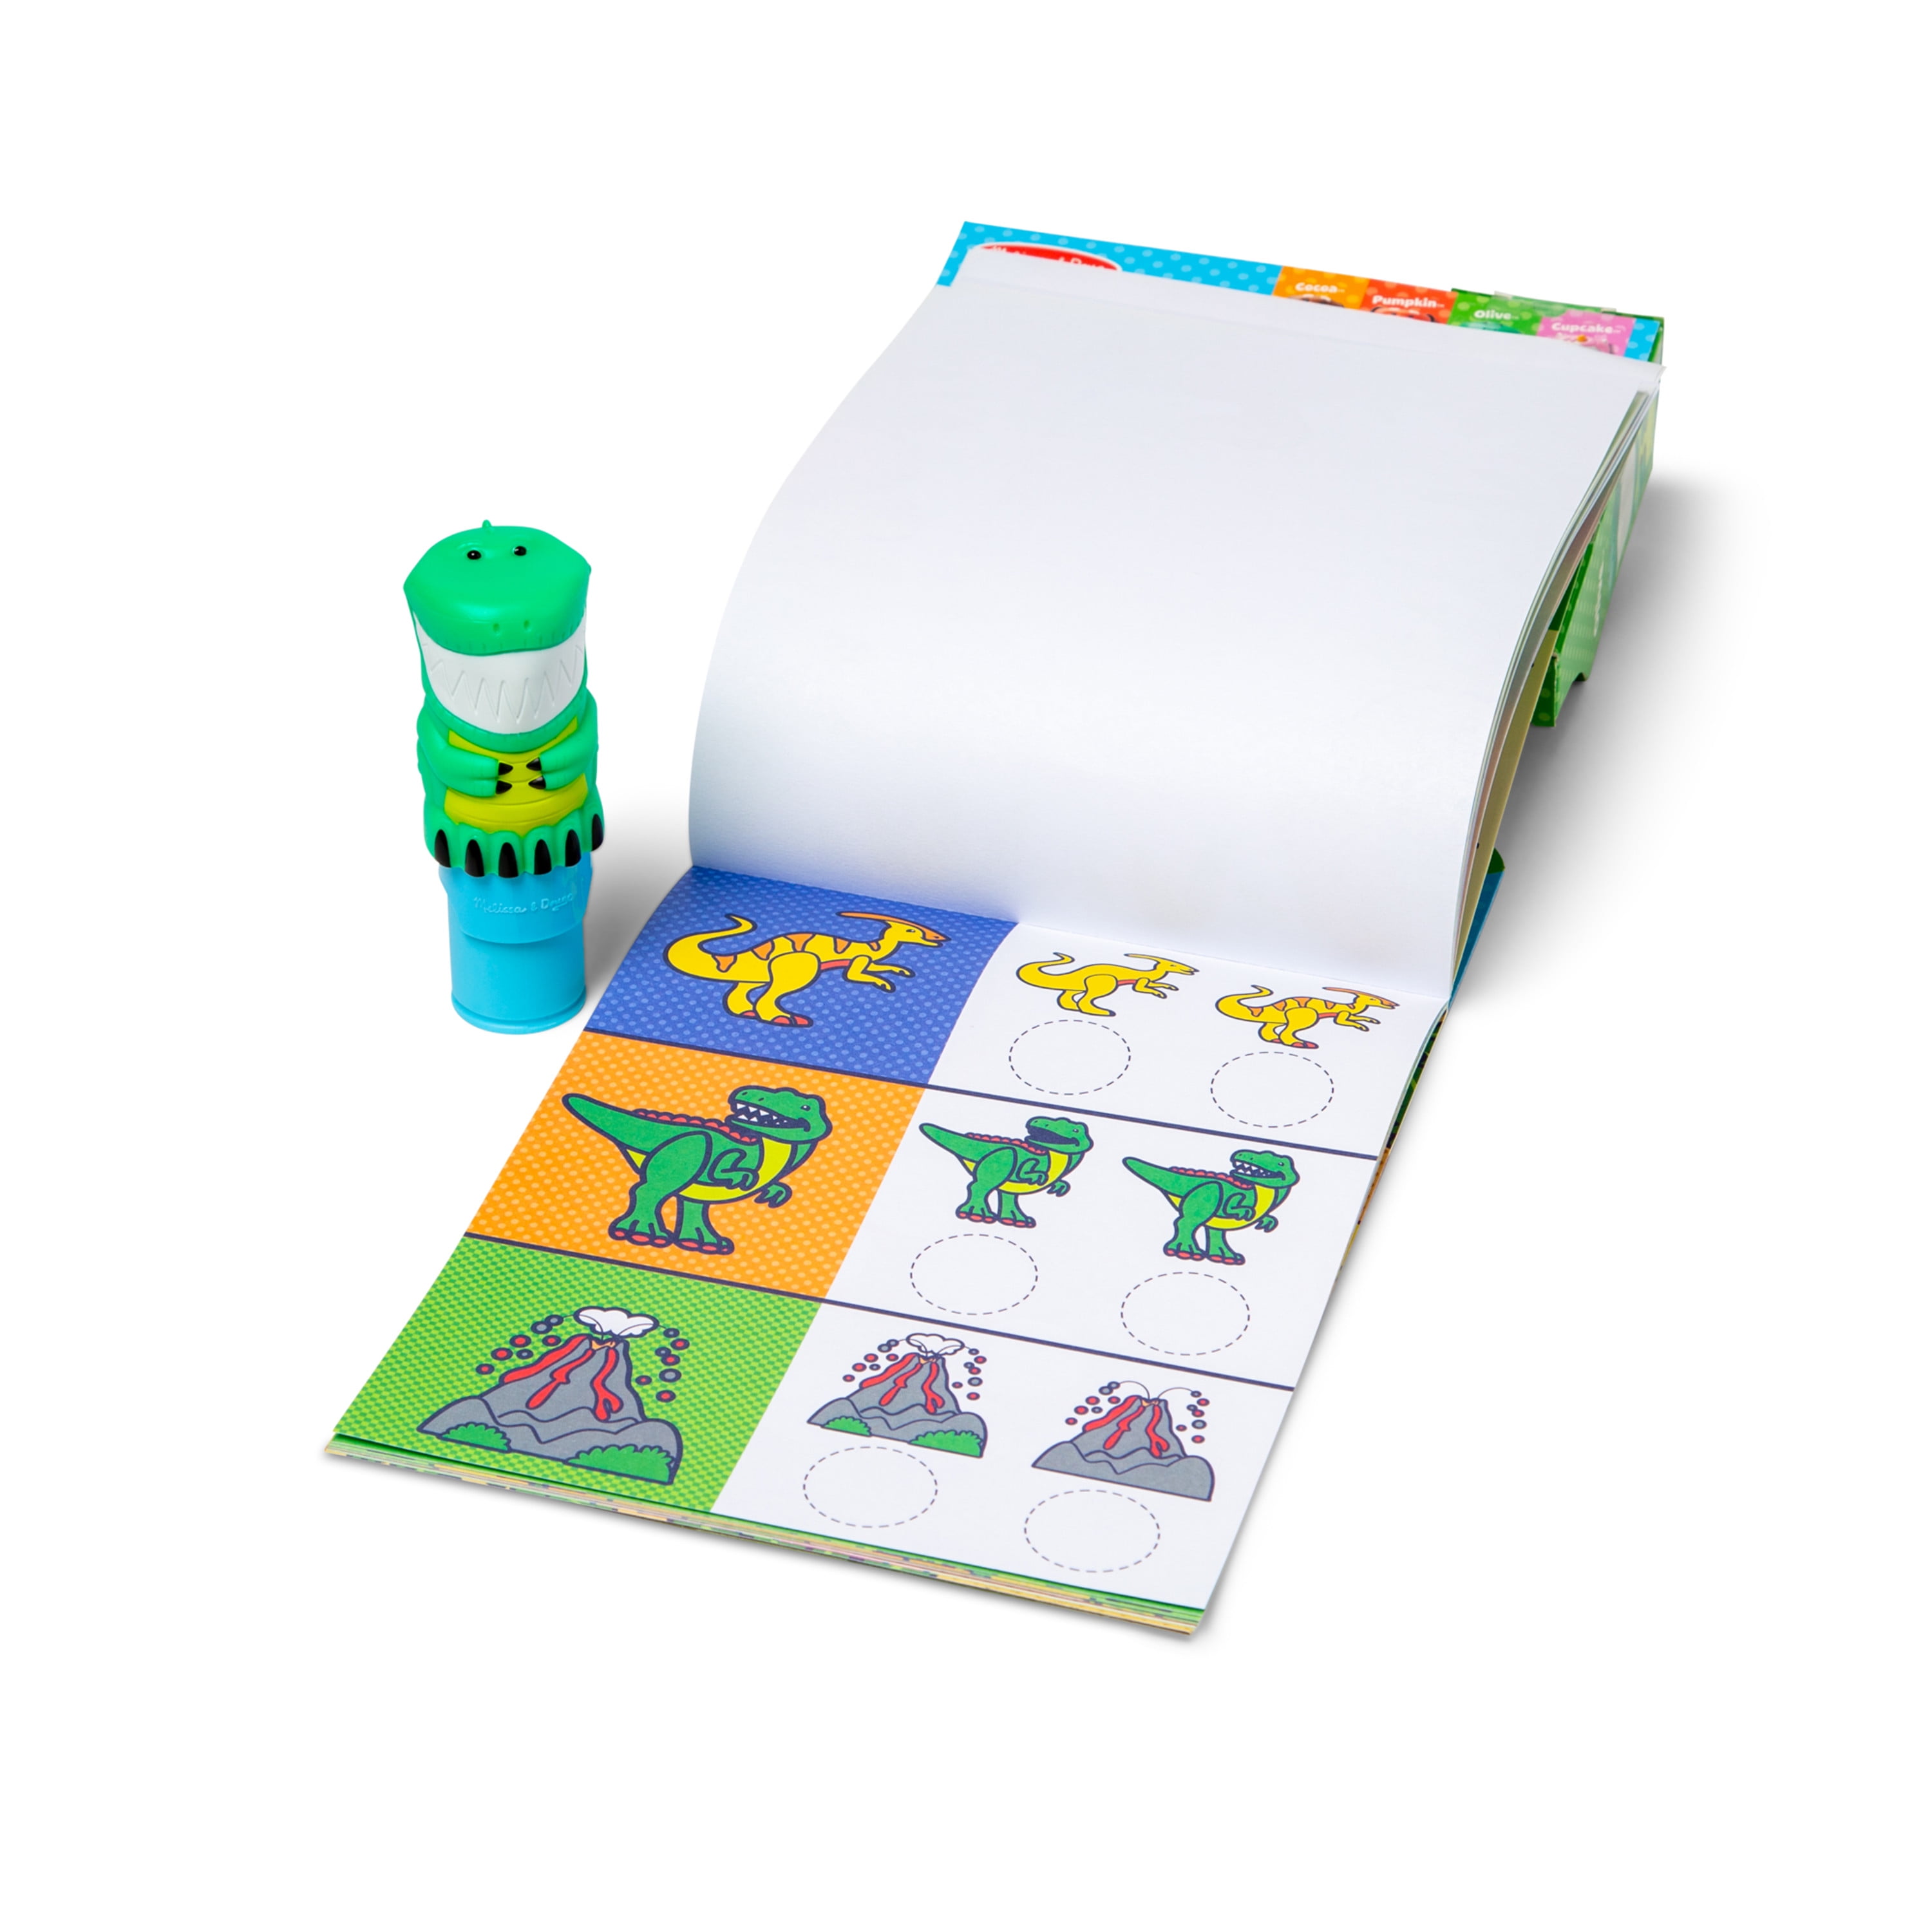 Melissa & Doug's Sticker WOW! Pack Launches Just in Time for National  Sticker Day - The Toy Insider